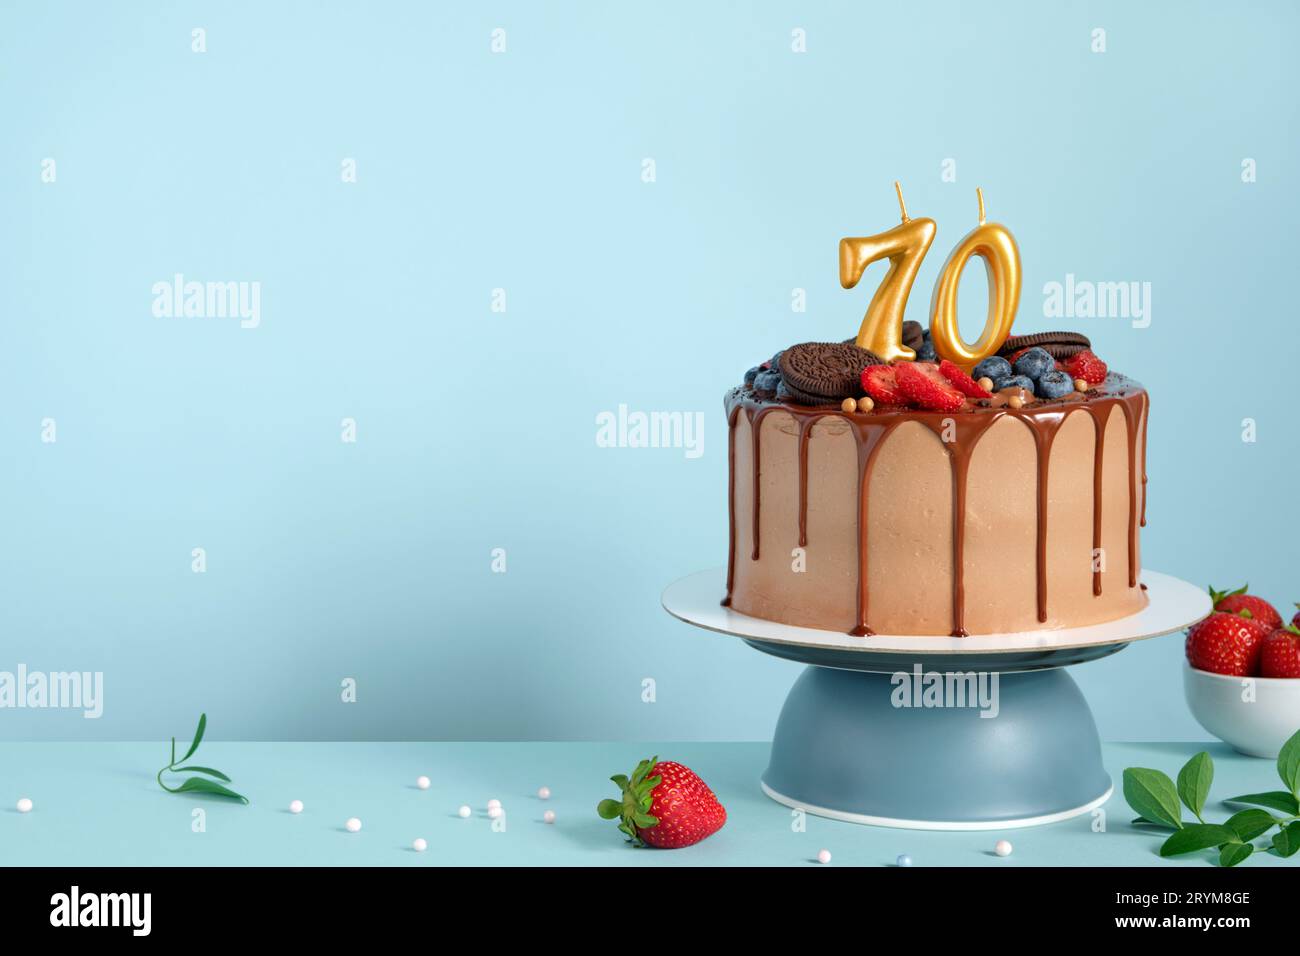 Chocolate birthday cake with berries, cookies and number seventy golden candles on blue wall background, copy space Stock Photo